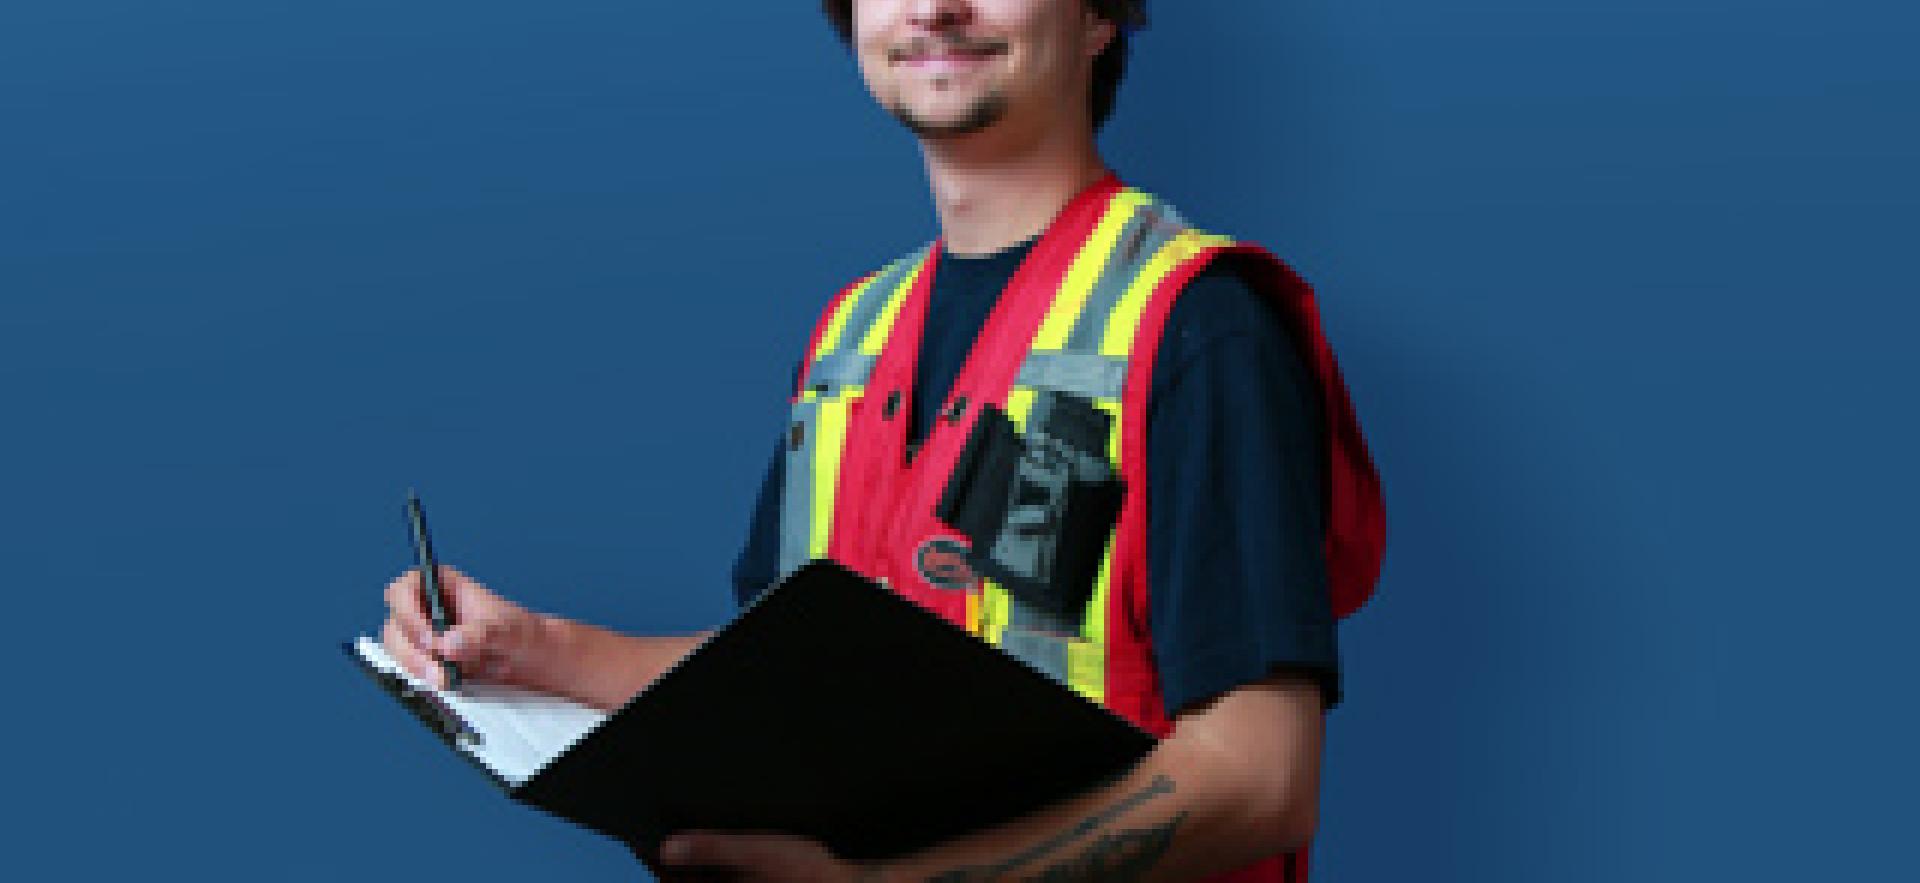 School of Natural Environment Student wearing safety vest, hard hat and looking at camera with text over blue background YOUR TIME TO BE OUTDOORS